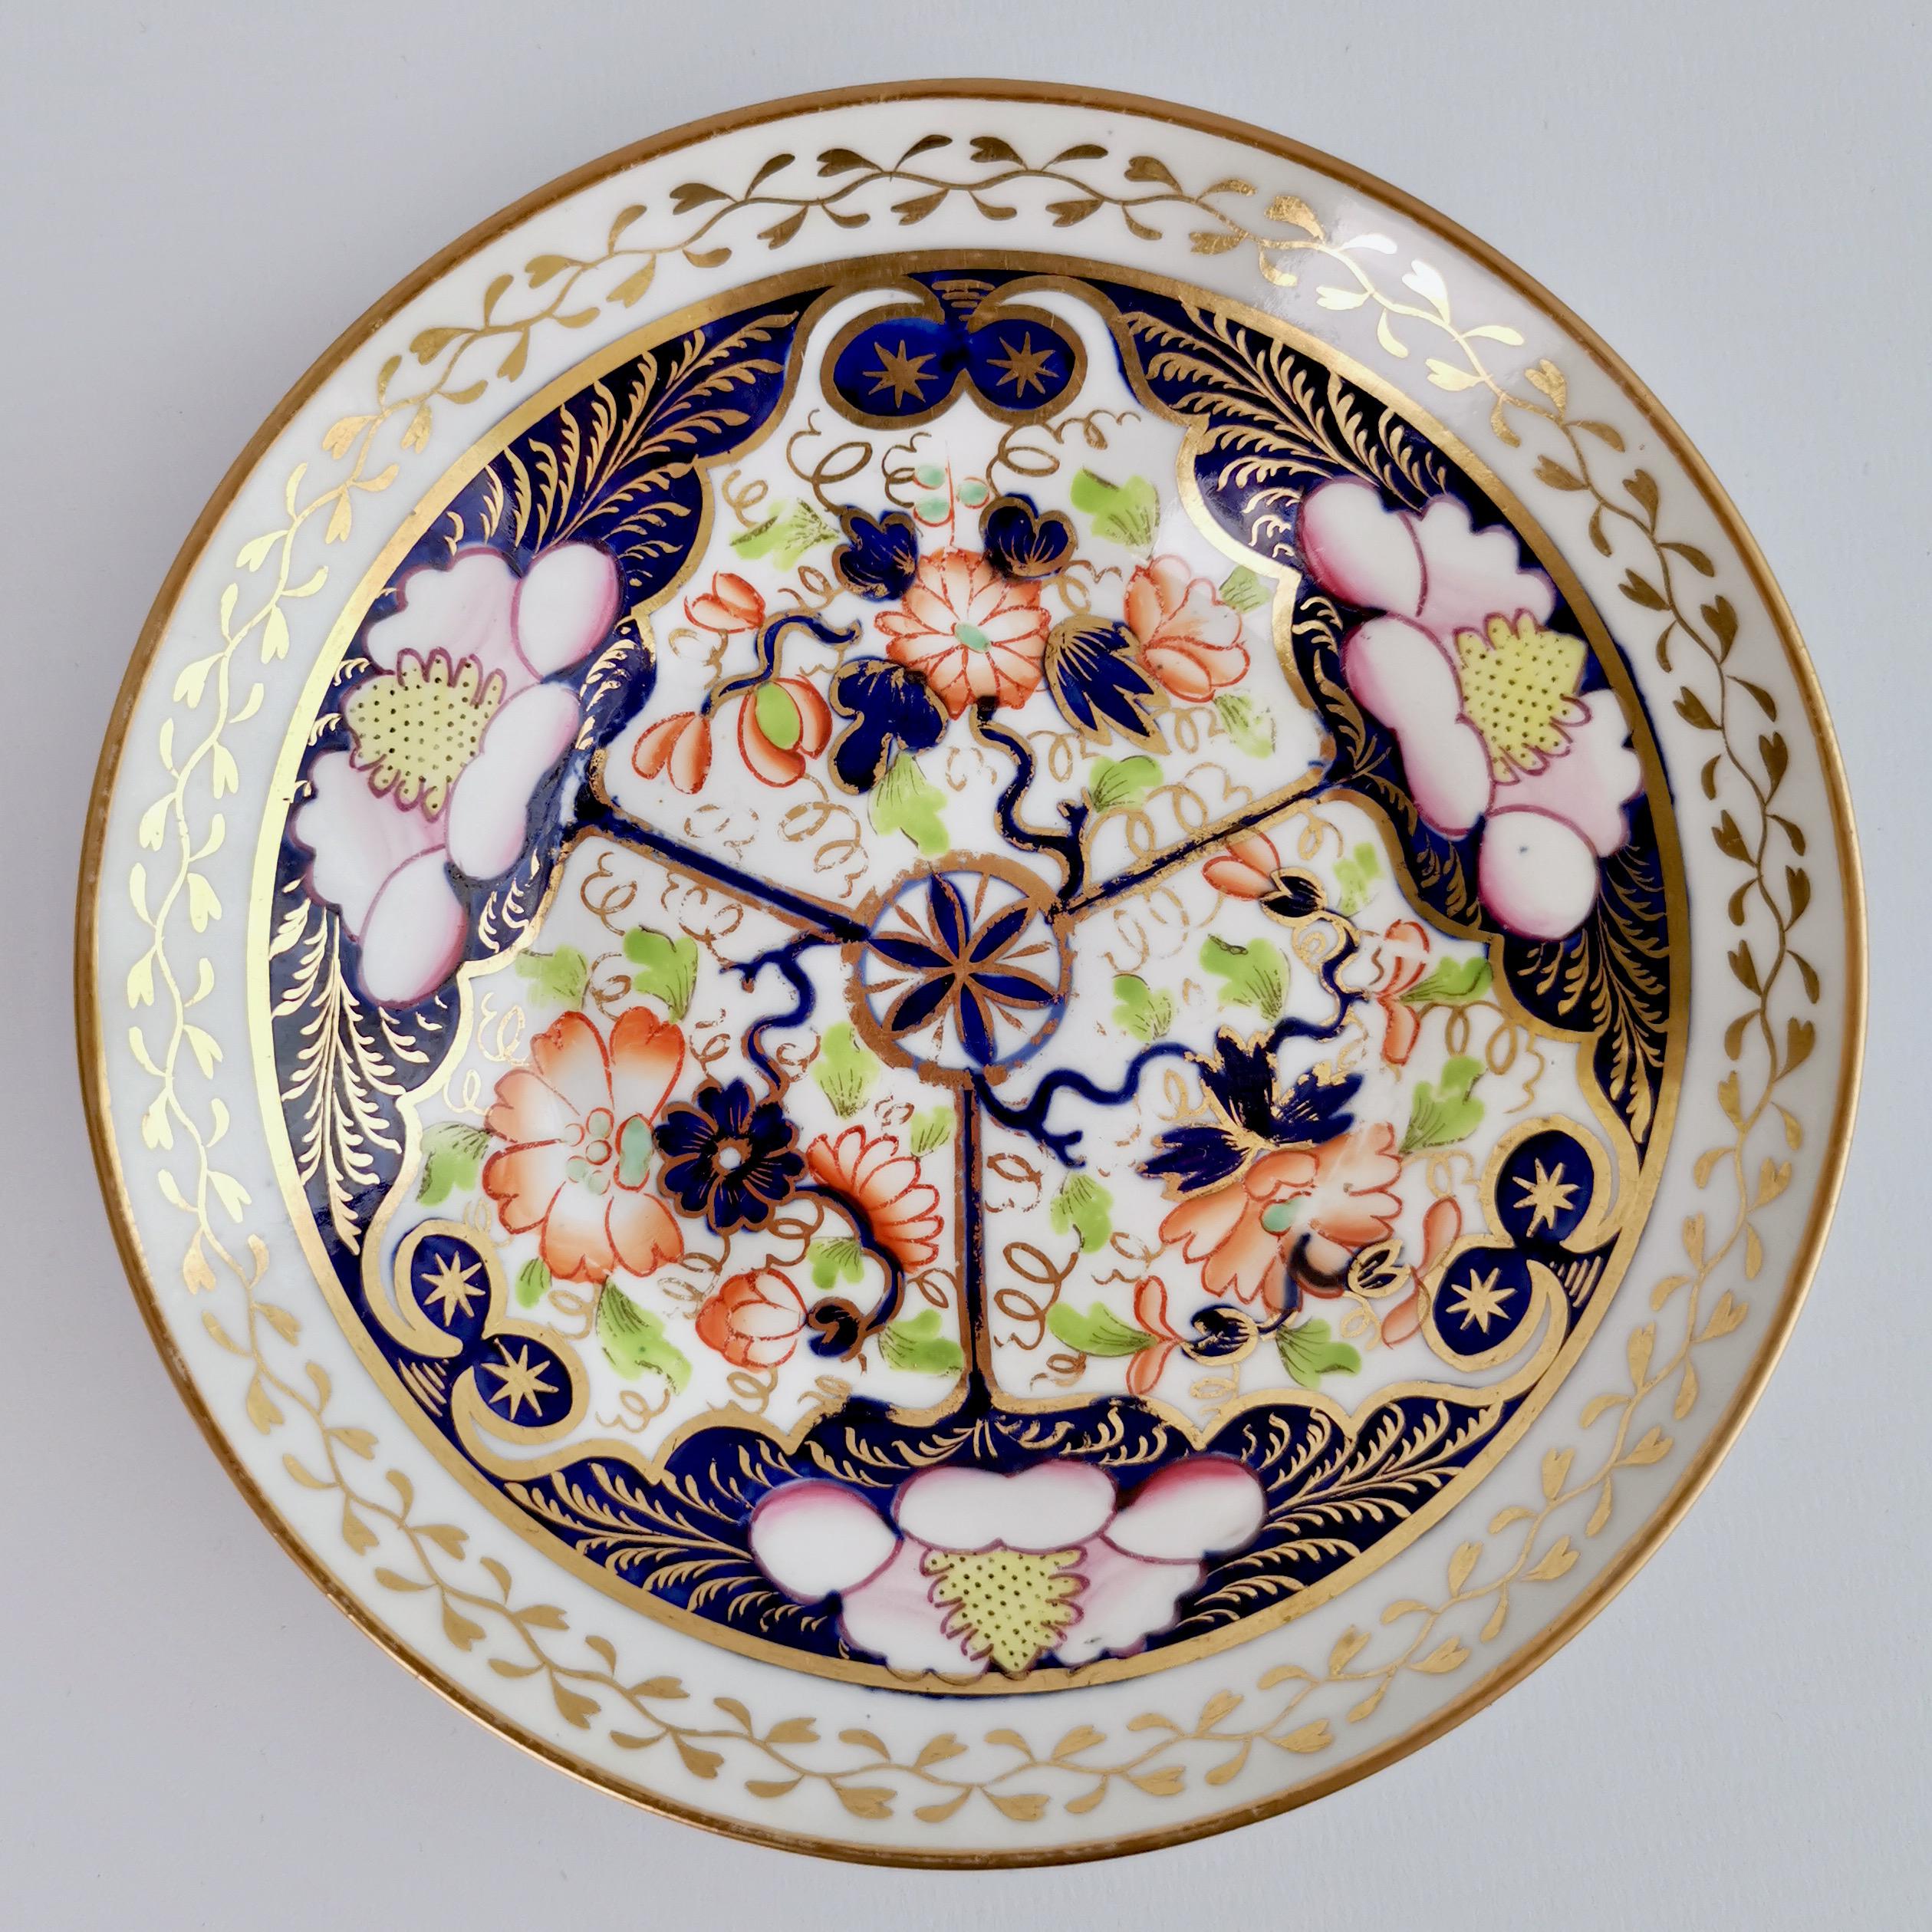 Hand-Painted New Hall Porcelain Teacup, Imari Pattern with Pink, Regency, ca 1816